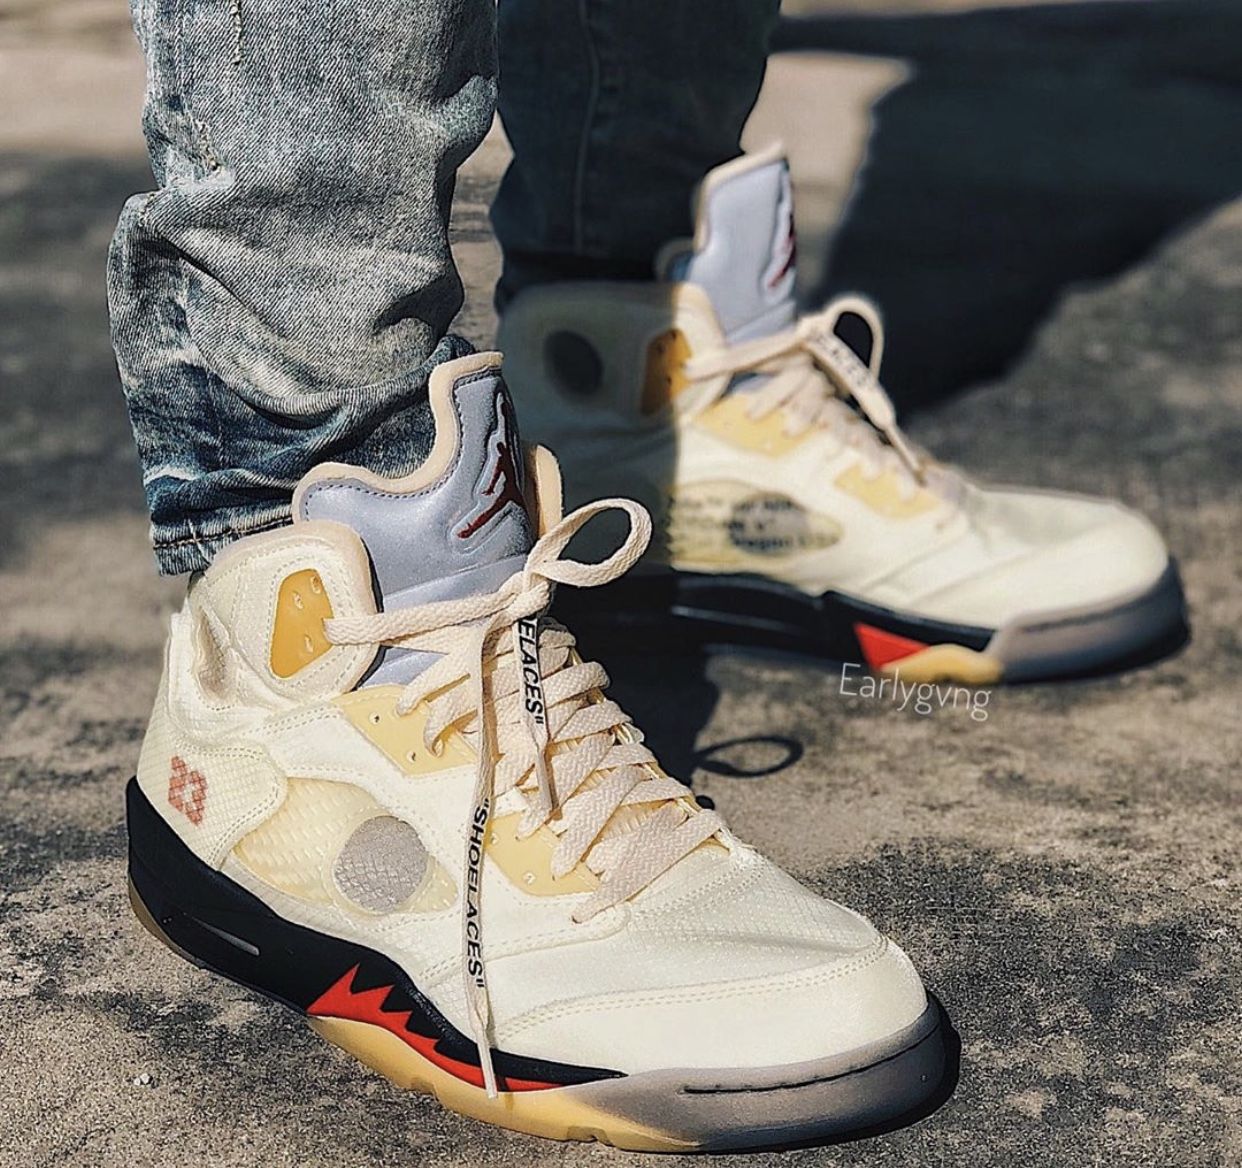 EARLY REVIEW! Air Jordan 5 “SAIL” OFF WHITE Review & On Feet In 4K 